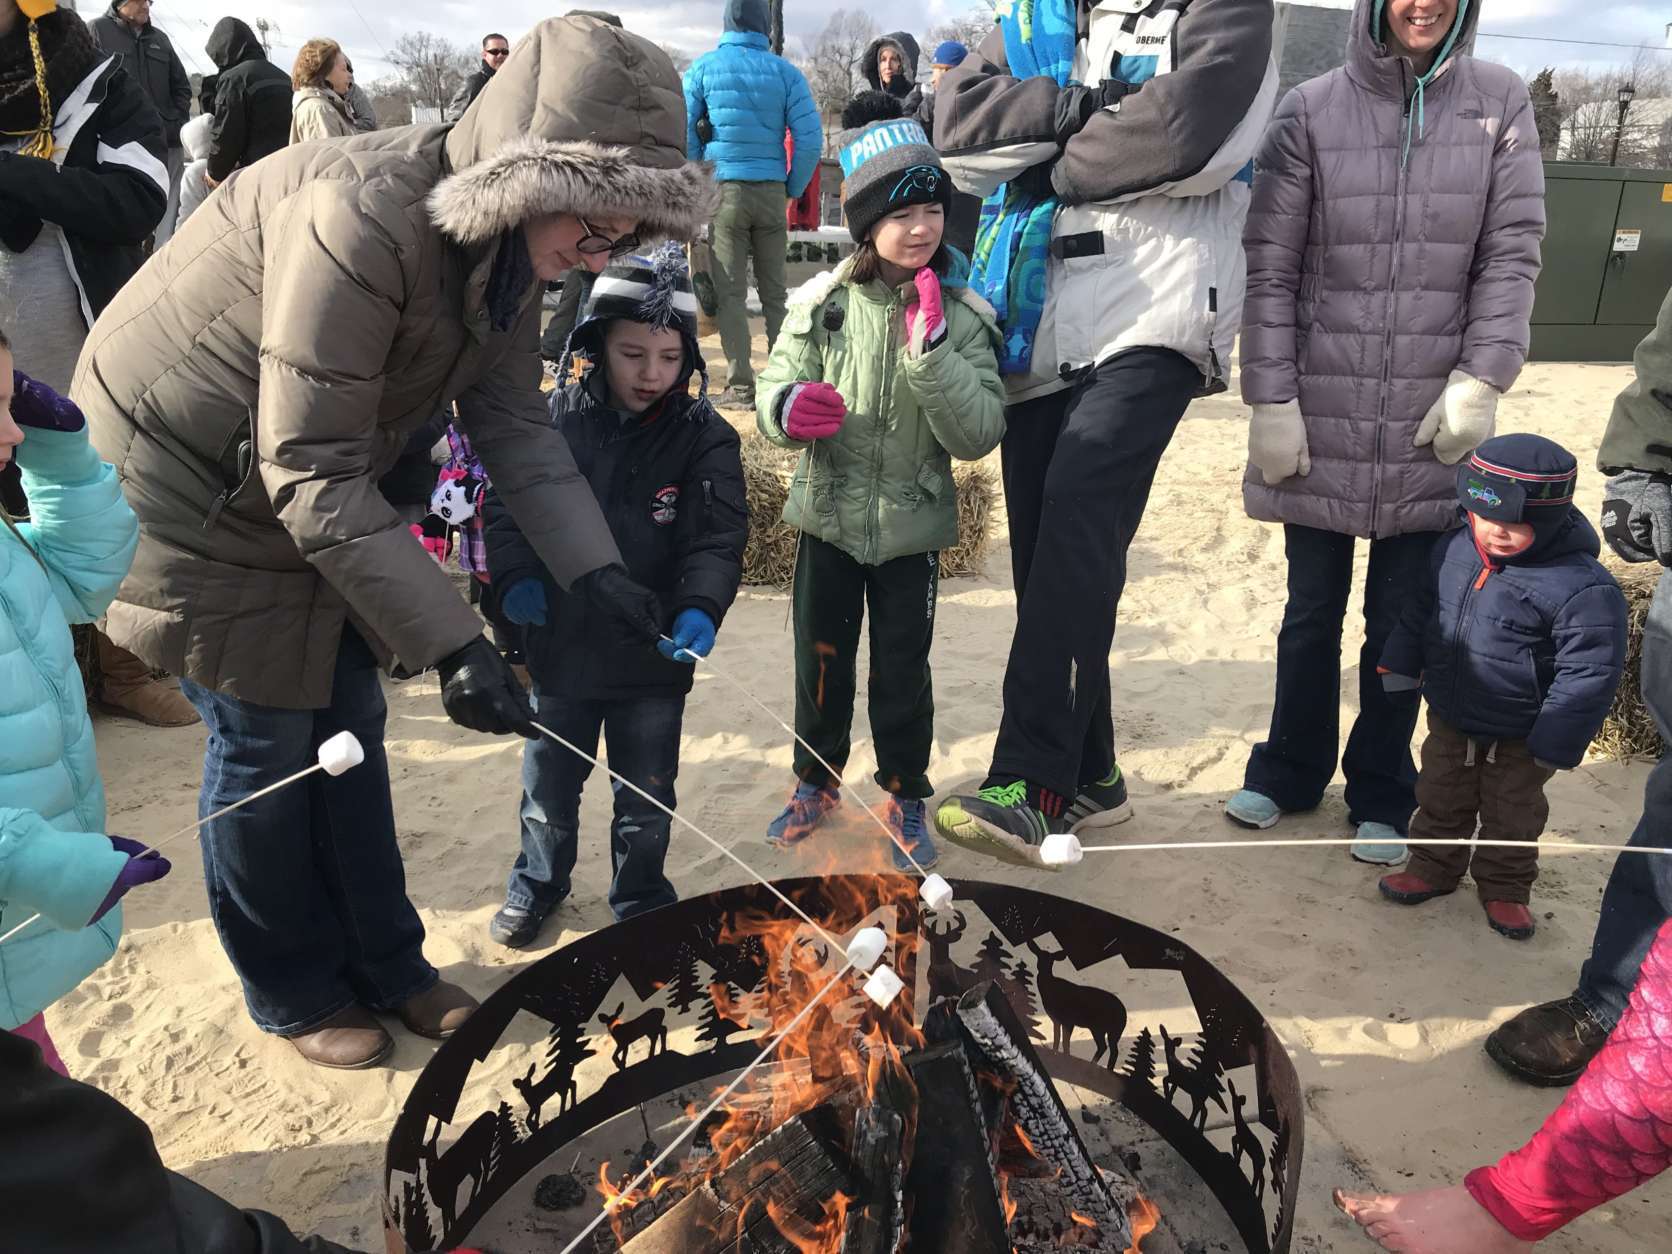 After the plunge, some people gathered to toast marshmallows and warm up at a fire pit on the beach. (WTOP/Michelle Basch)